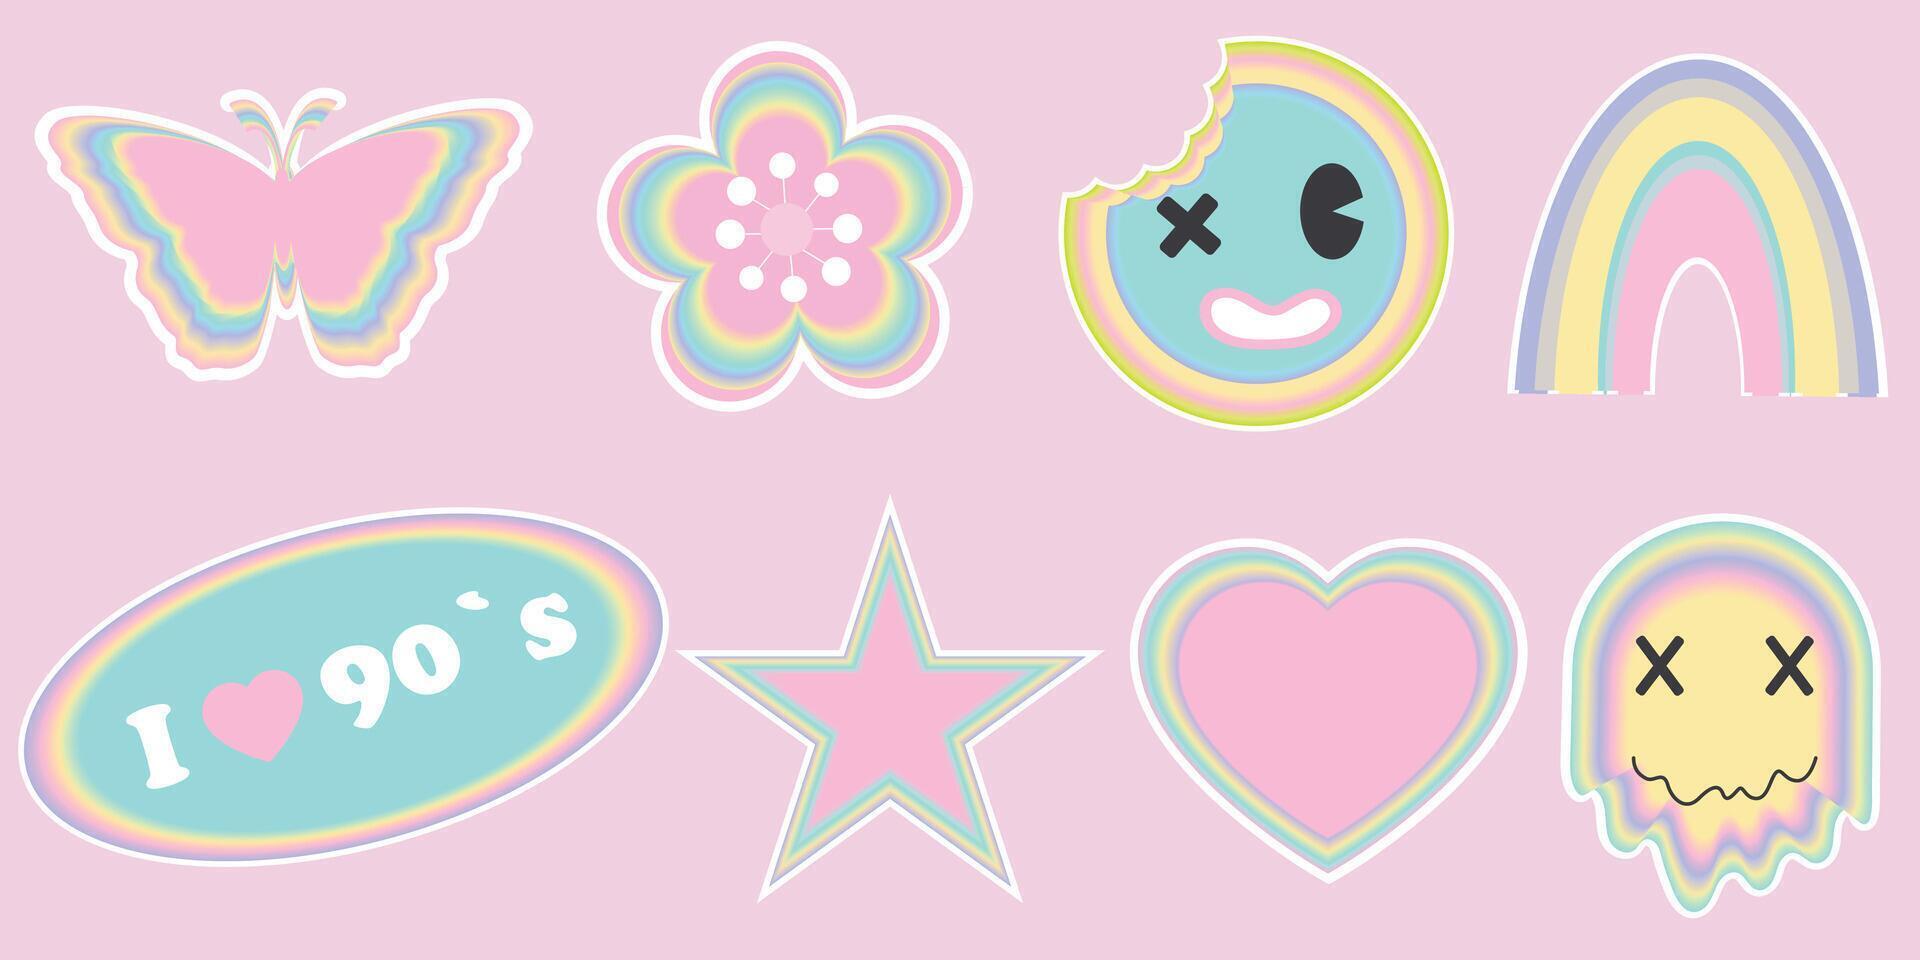 Cute trendy girly retro 2000s stickers with cartoon comic label patches. Girlish funny groovy vaporwave acid stickers in geometric shapes. Vector of y2k , 90s graphic design badges. Groovy style